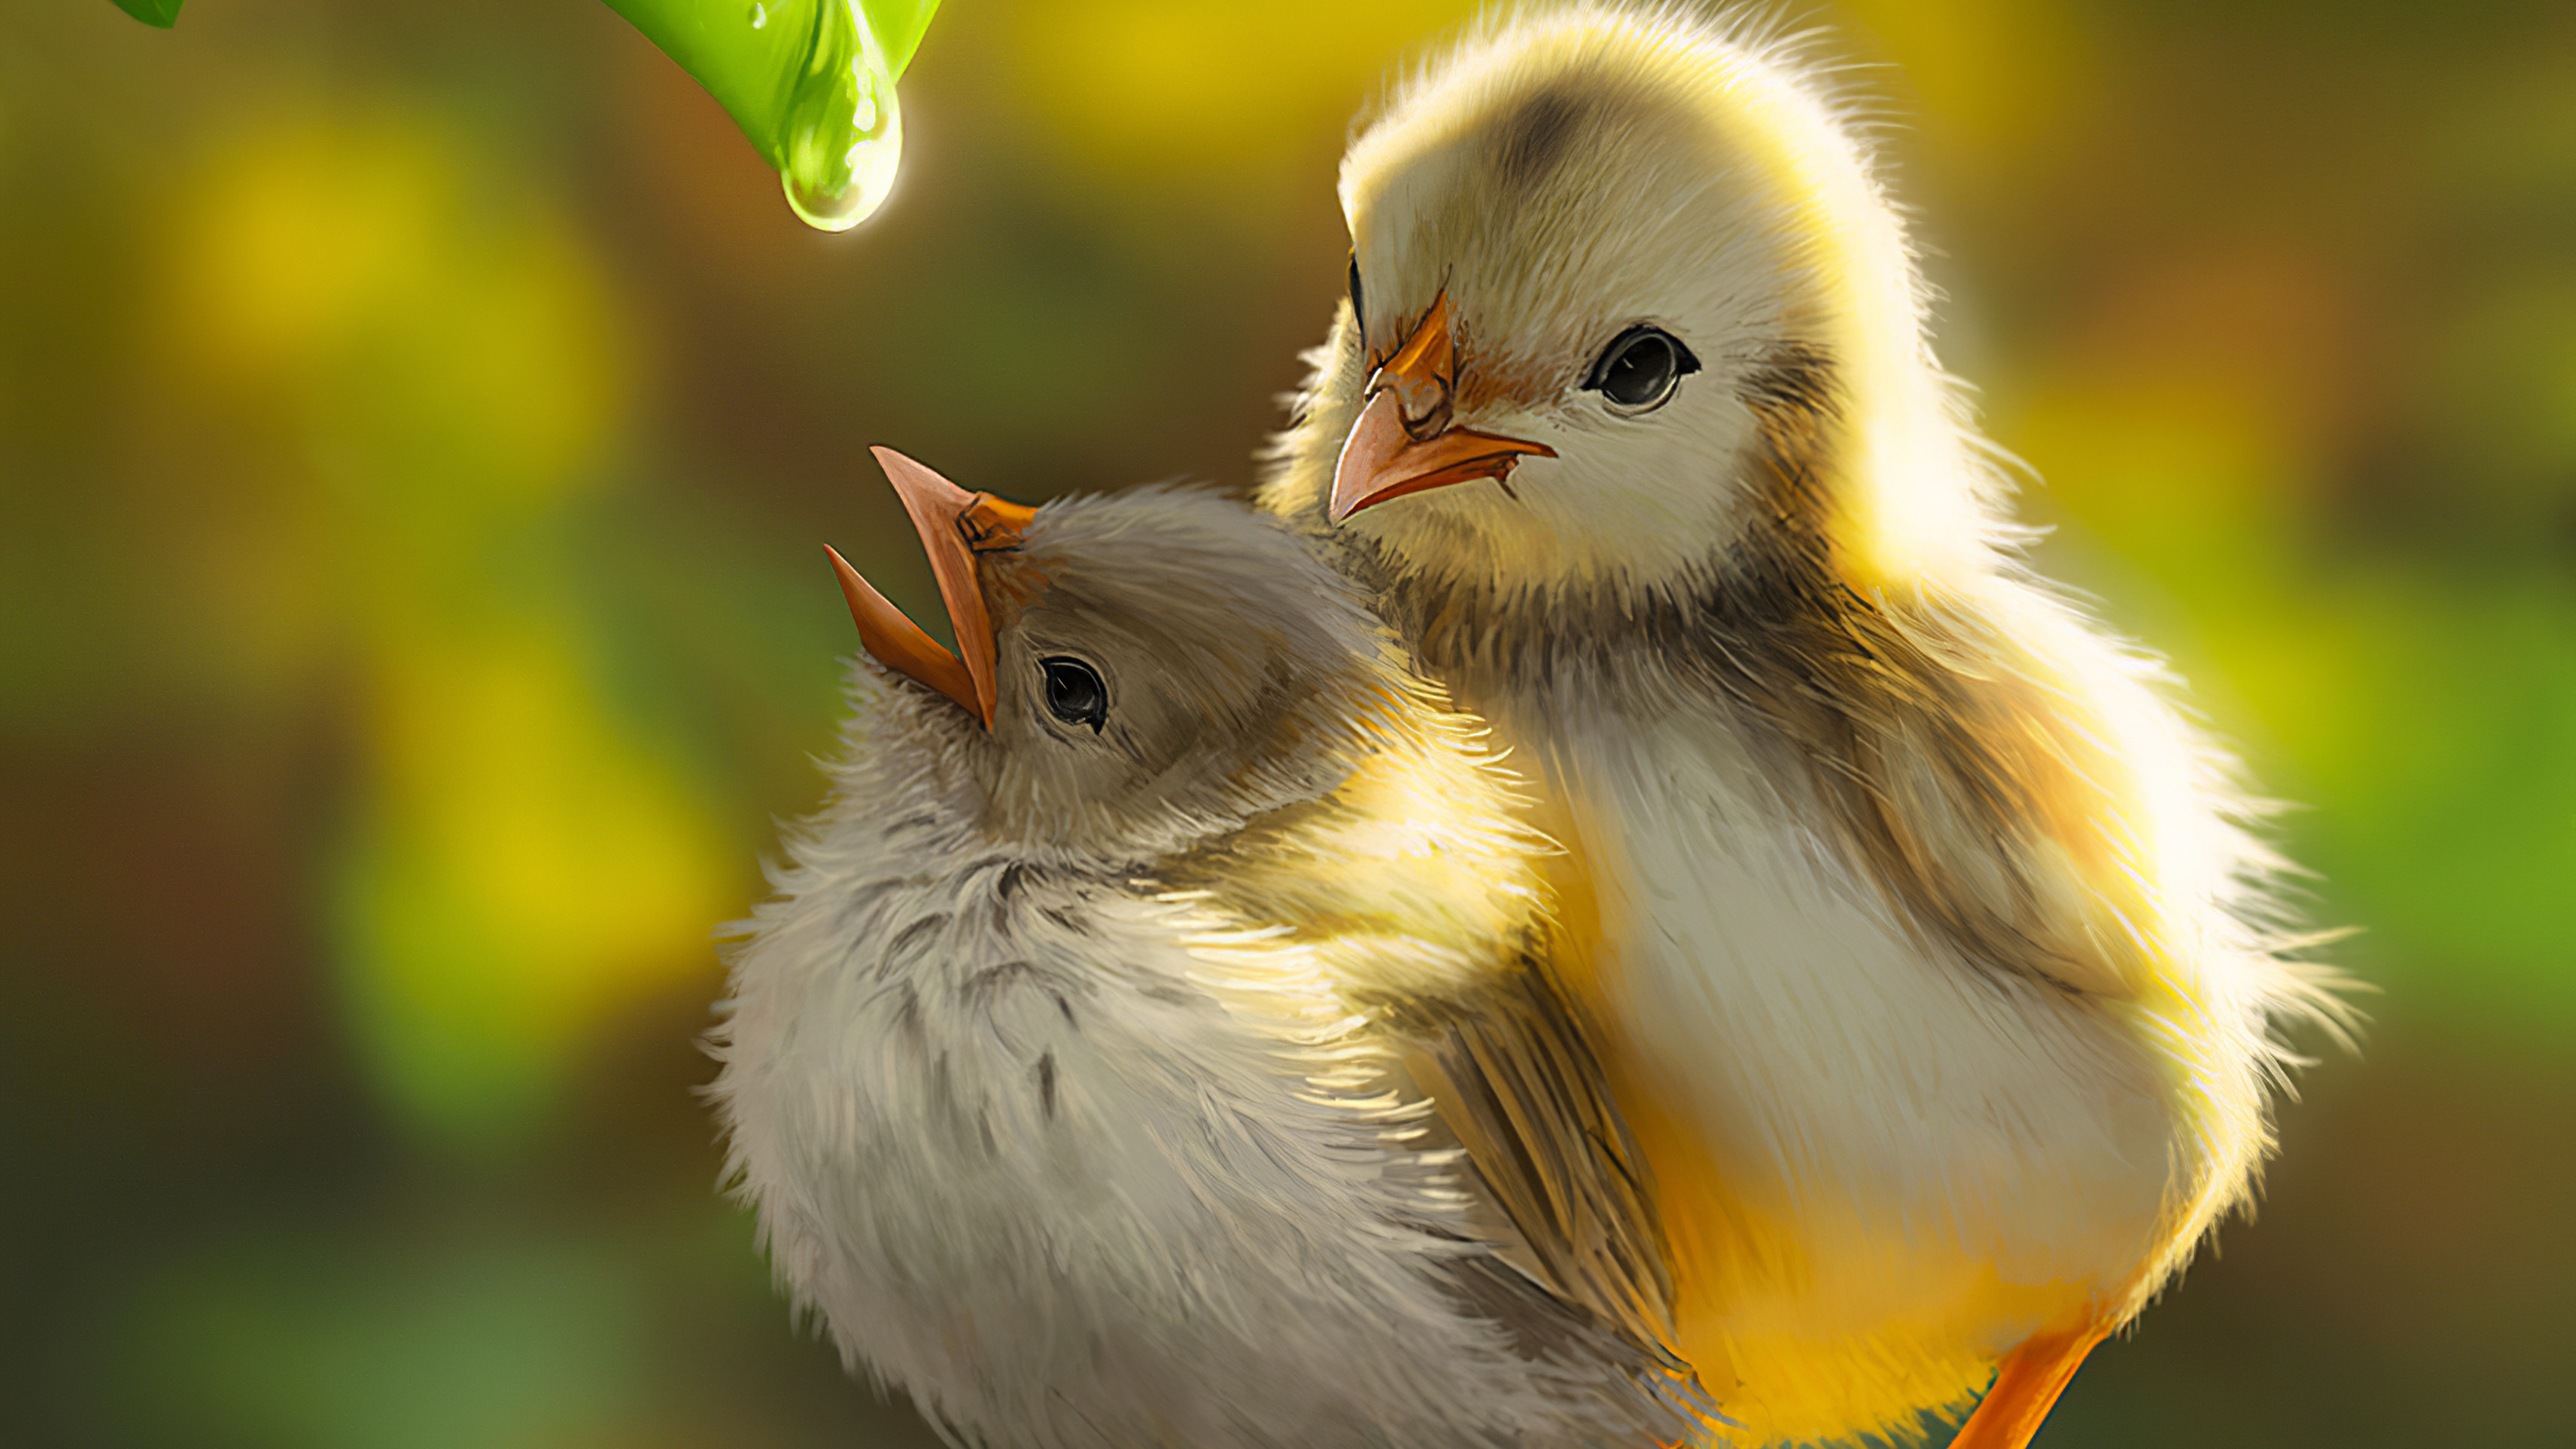 Cute Chicks 4k, HD Artist, 4k Wallpapers, Images, Backgrounds, Photos